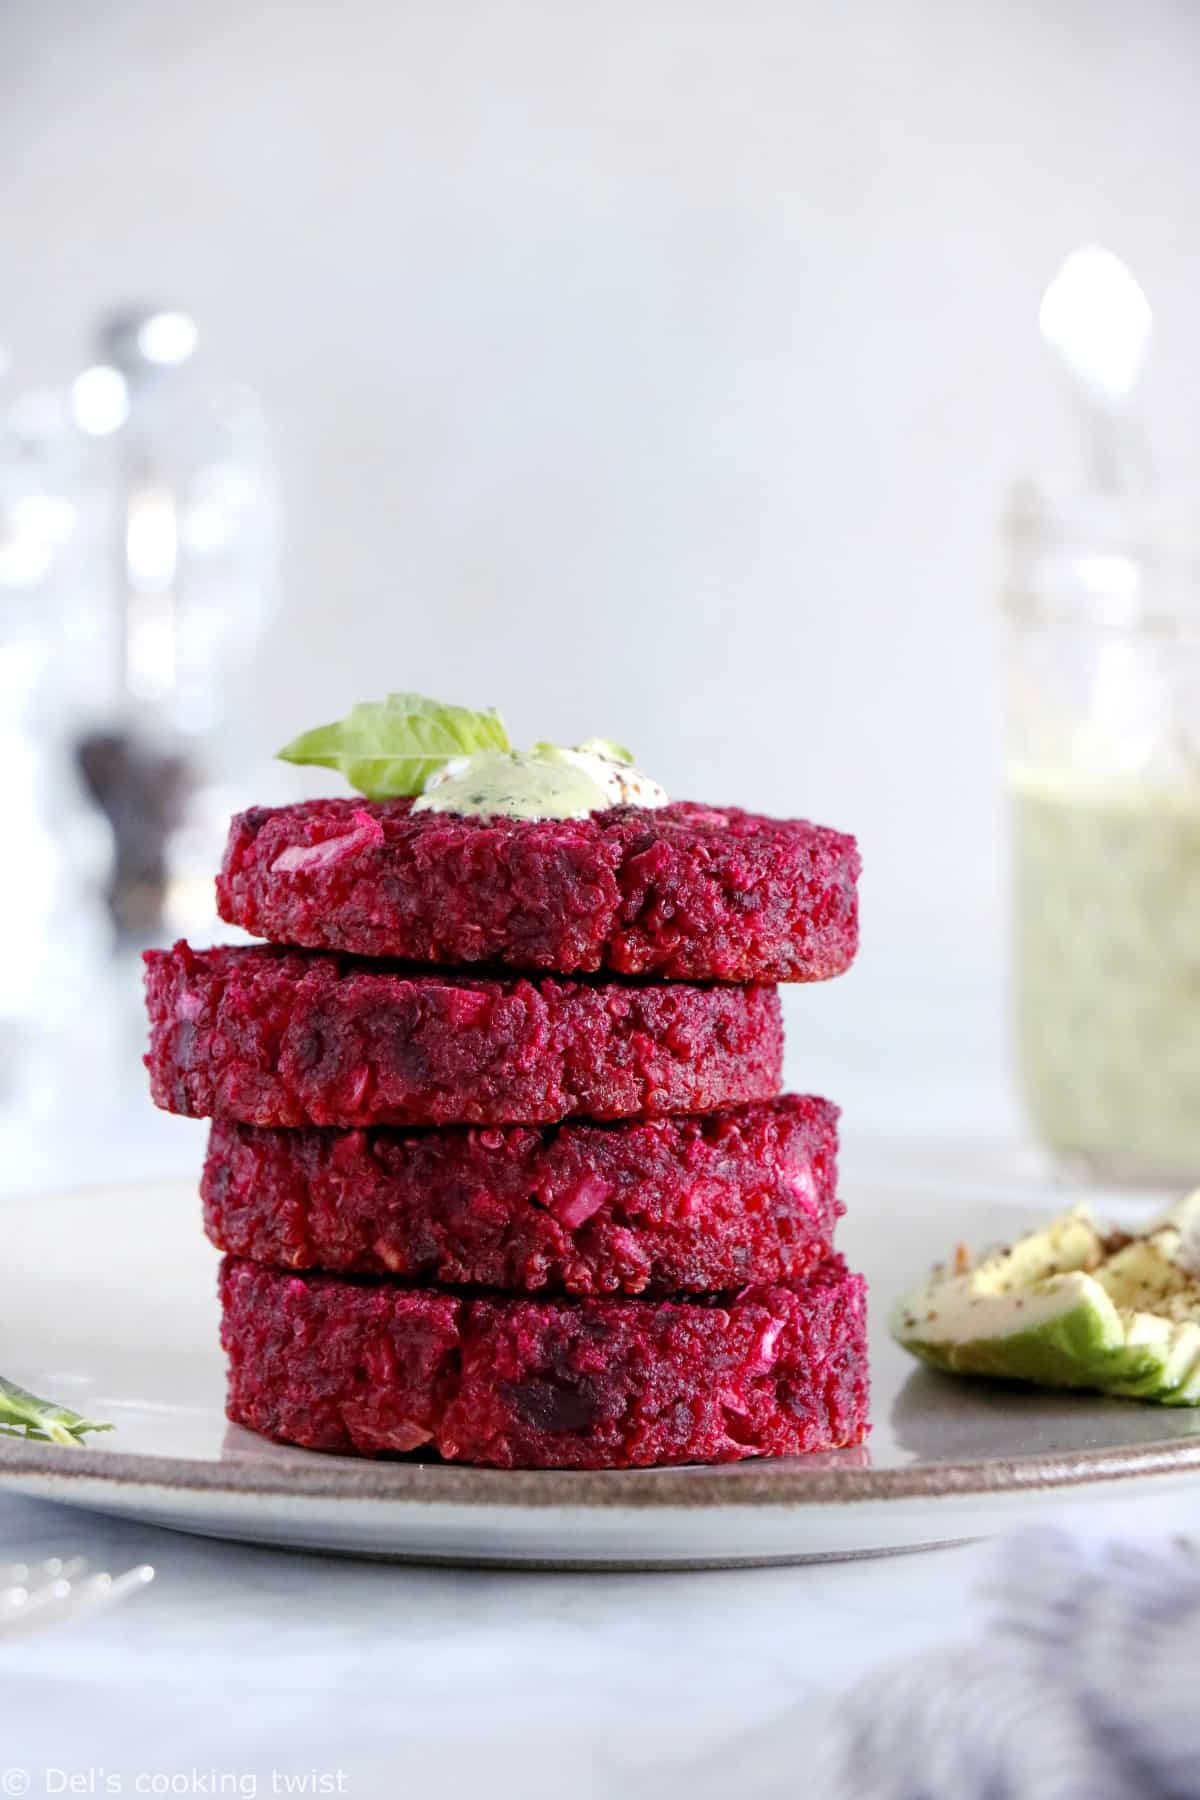 Bring colors to your meals with these veggie beet patties, prepared with beets, quinoa and ricotta cheese.